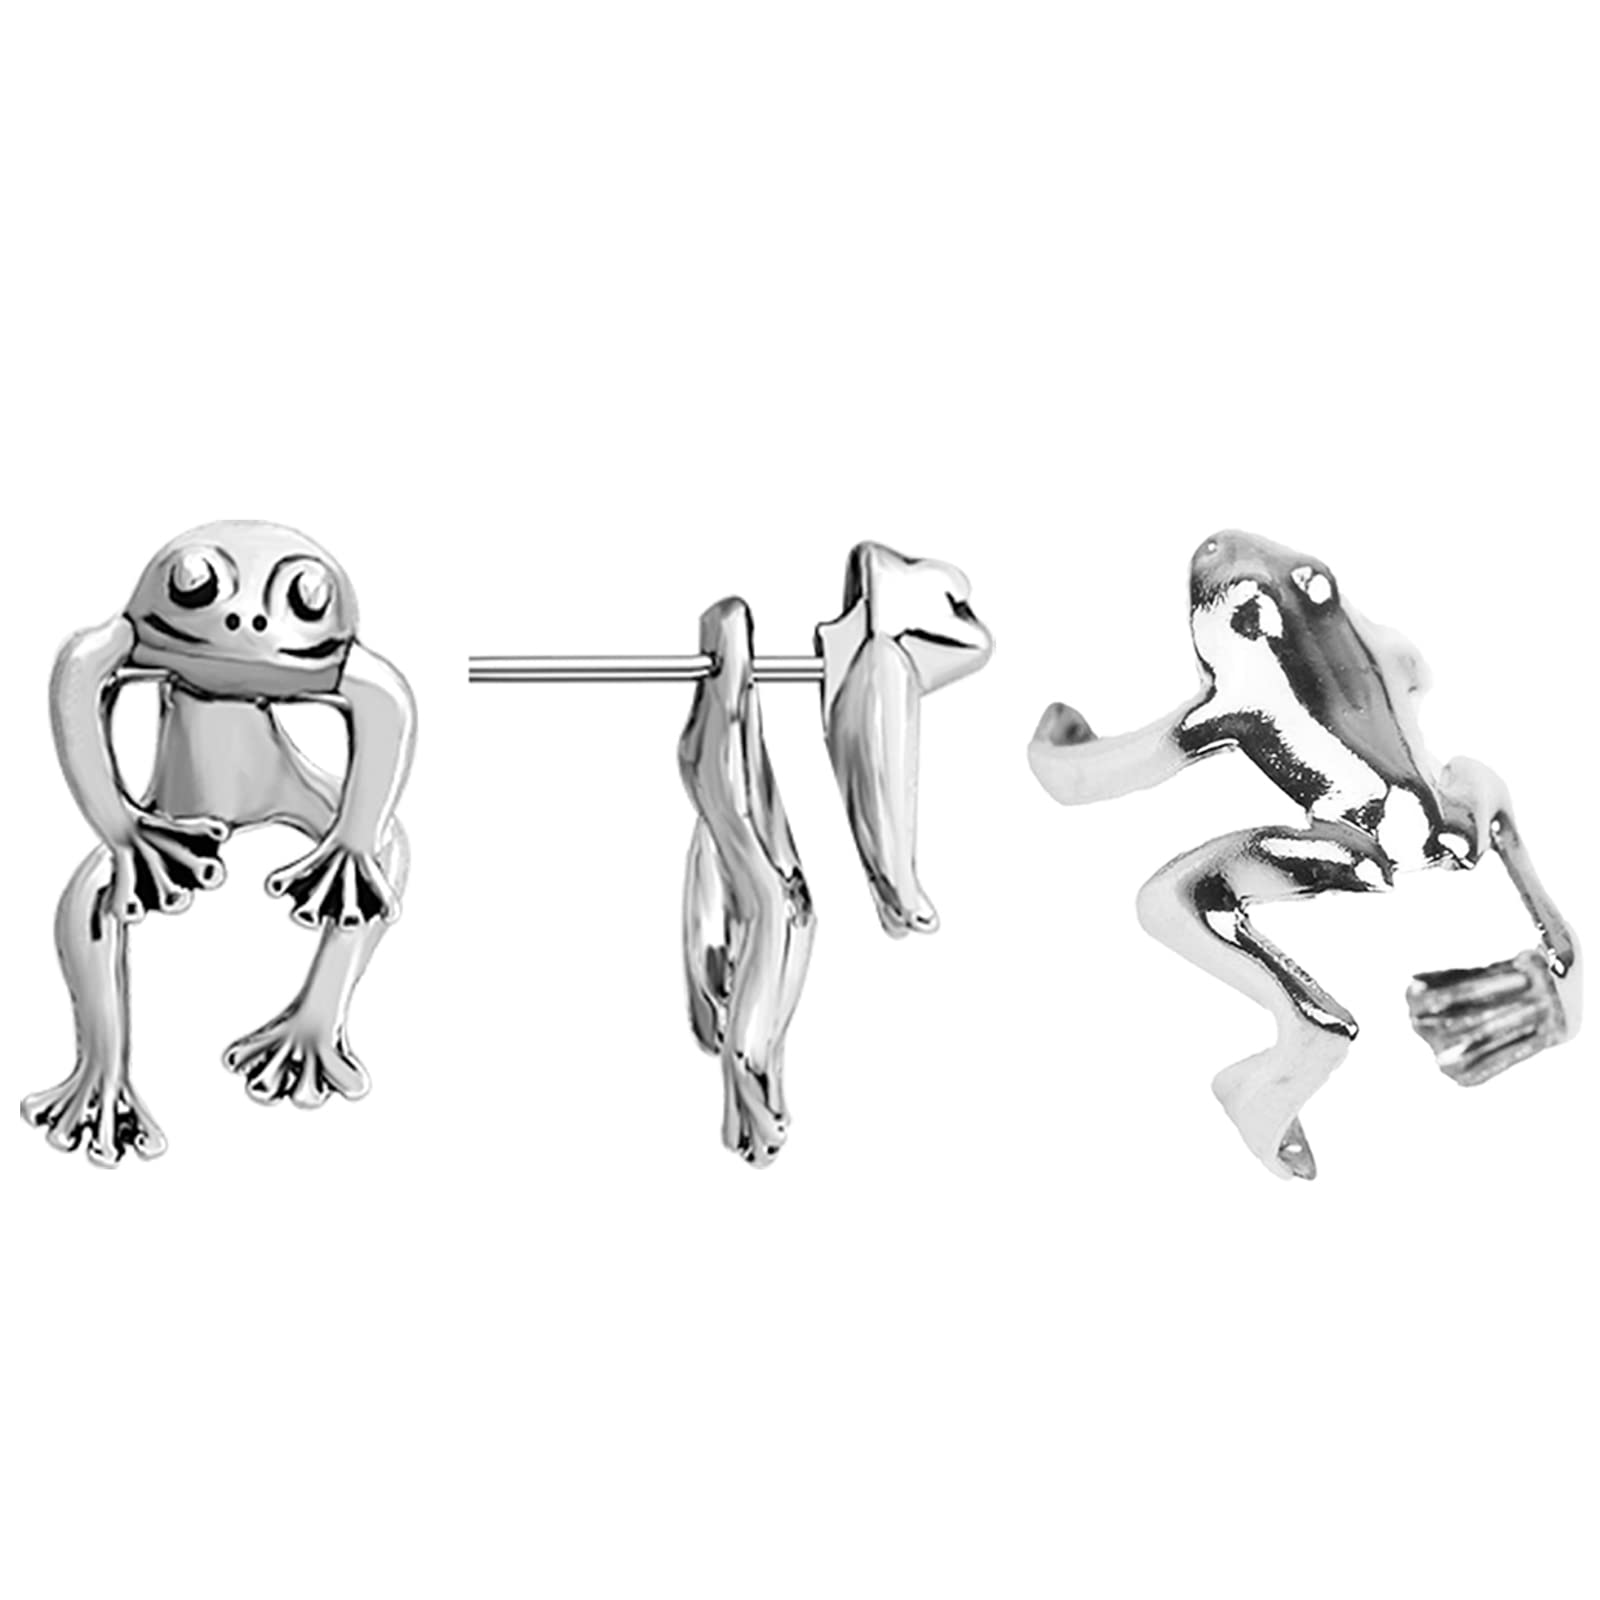 Frodete Silver Frog Earrings for Women Vintage Frogs Shaped Cute Animal Stud Earrings for Teens Girls Frog Jewelry Gifts Christmas Gifts